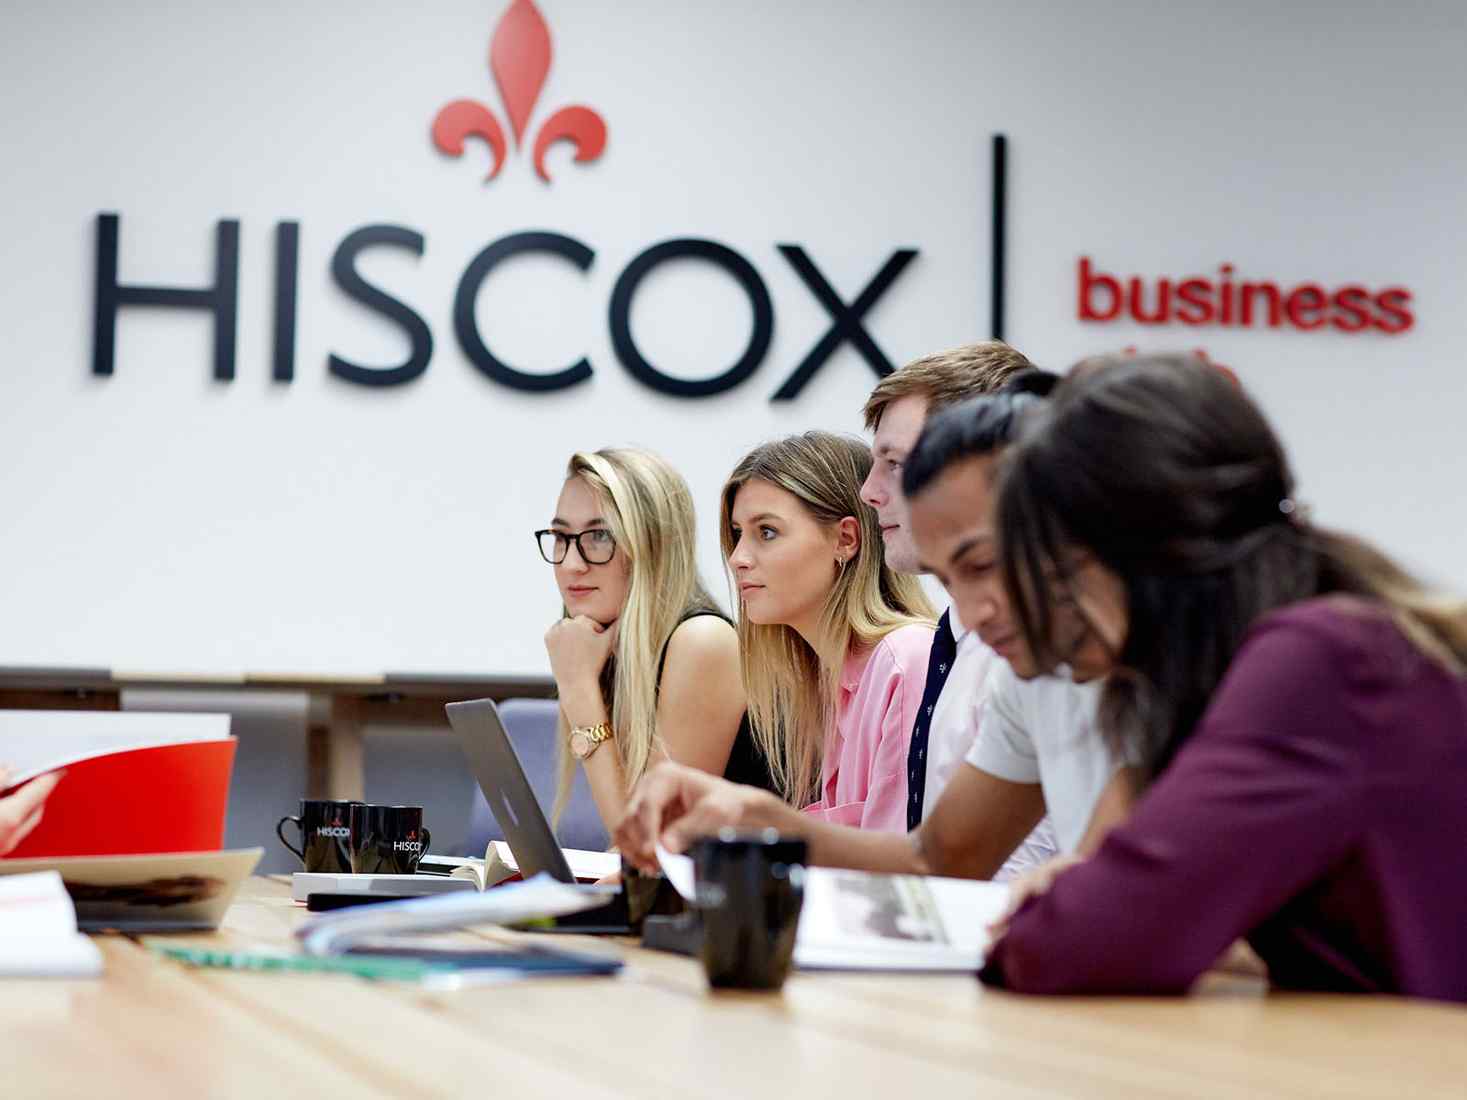 Students in workshop at Hiscox 